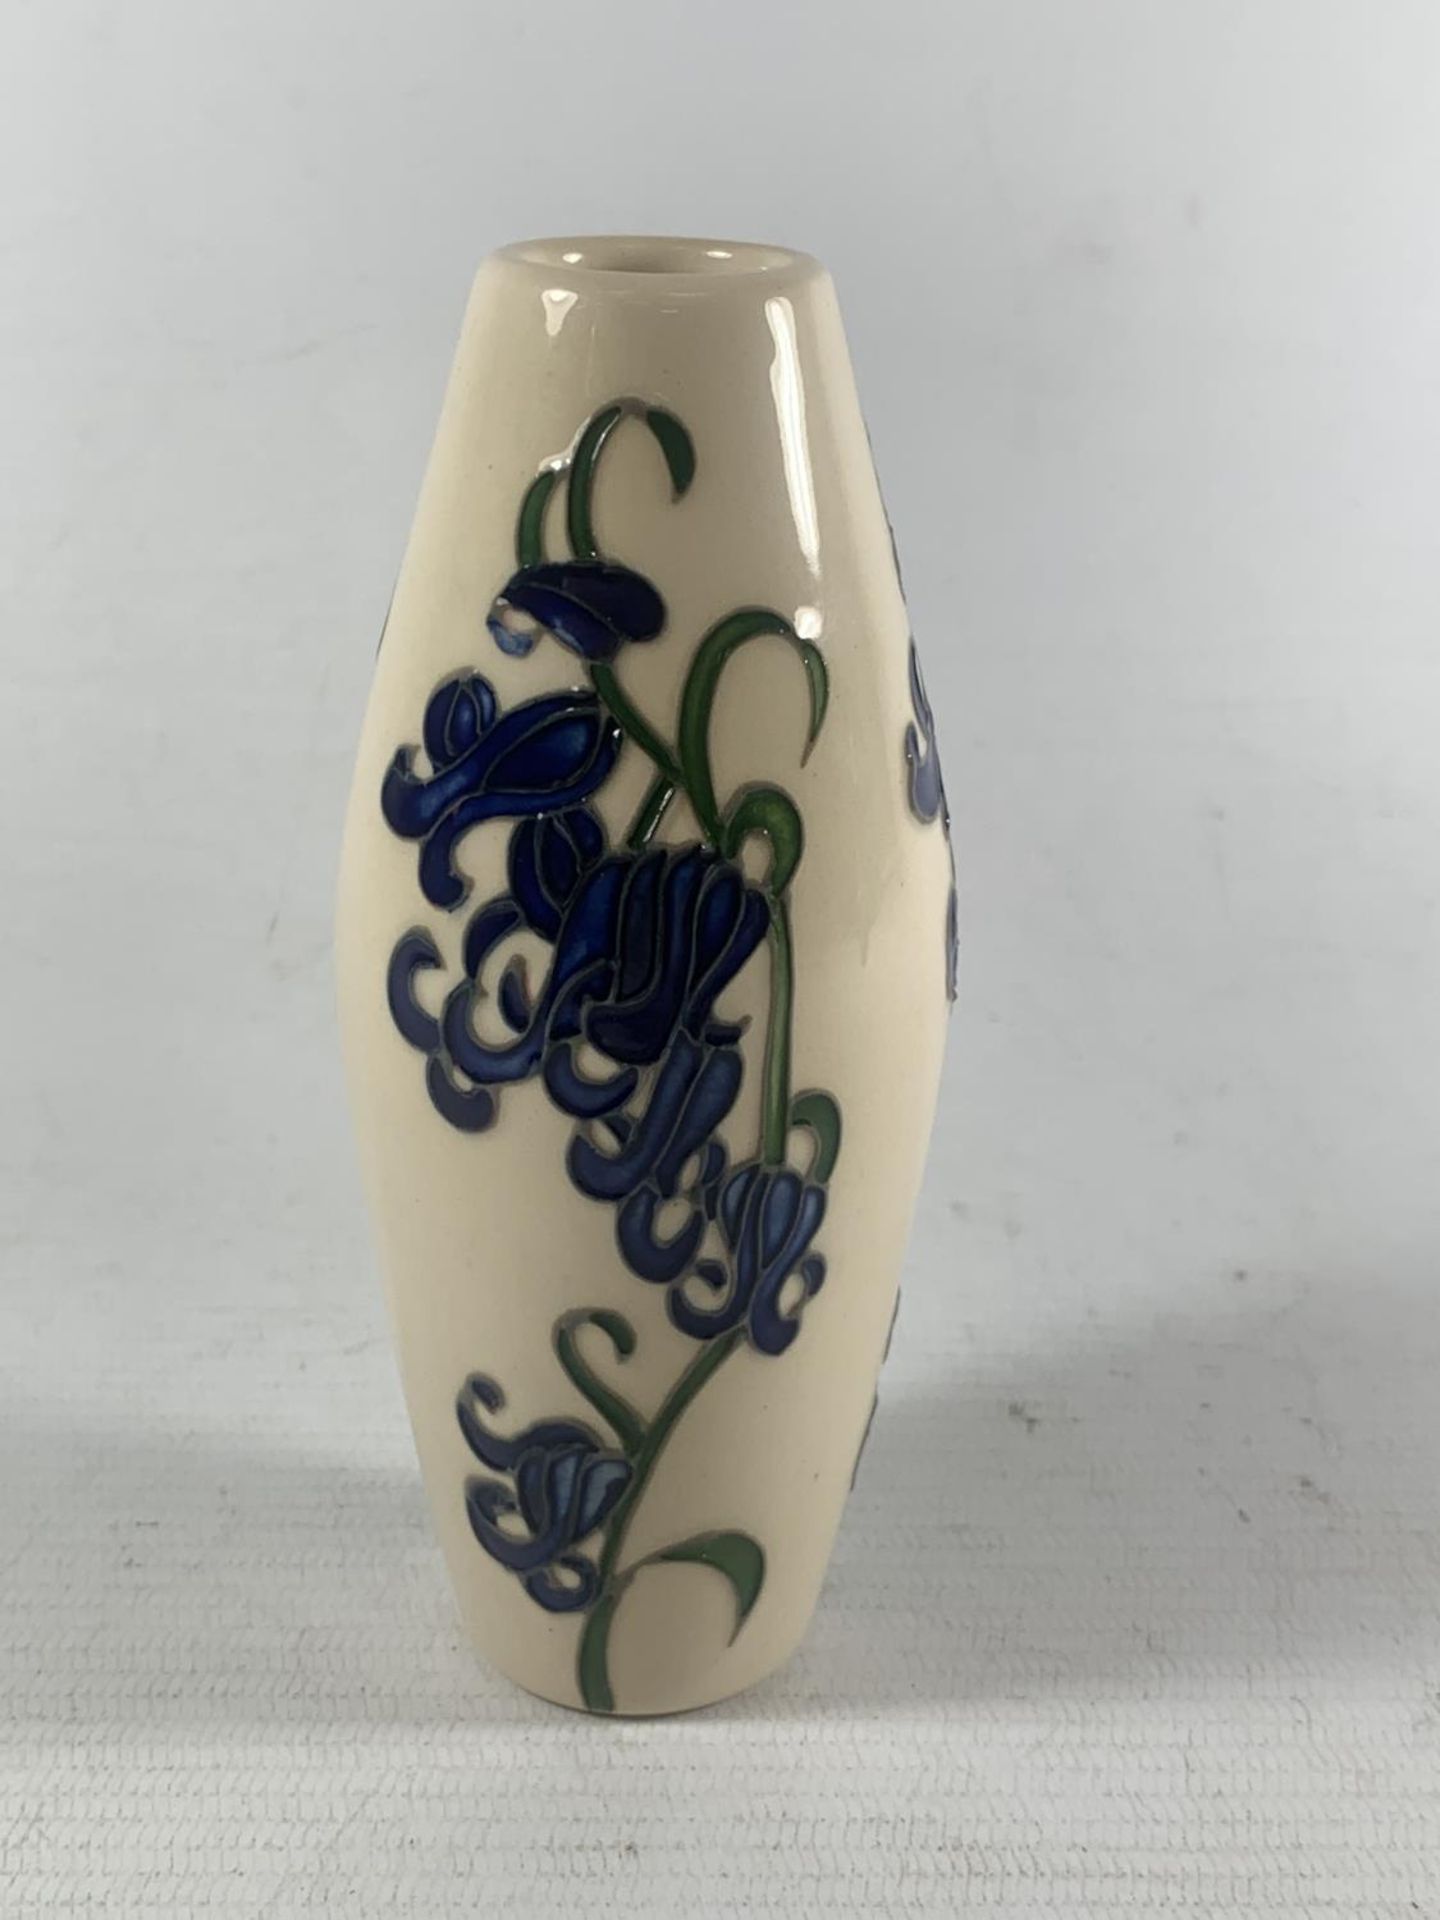 A MOORCROFT BLUEBELL HARMONY VASE HEIGHT 5 INCHES